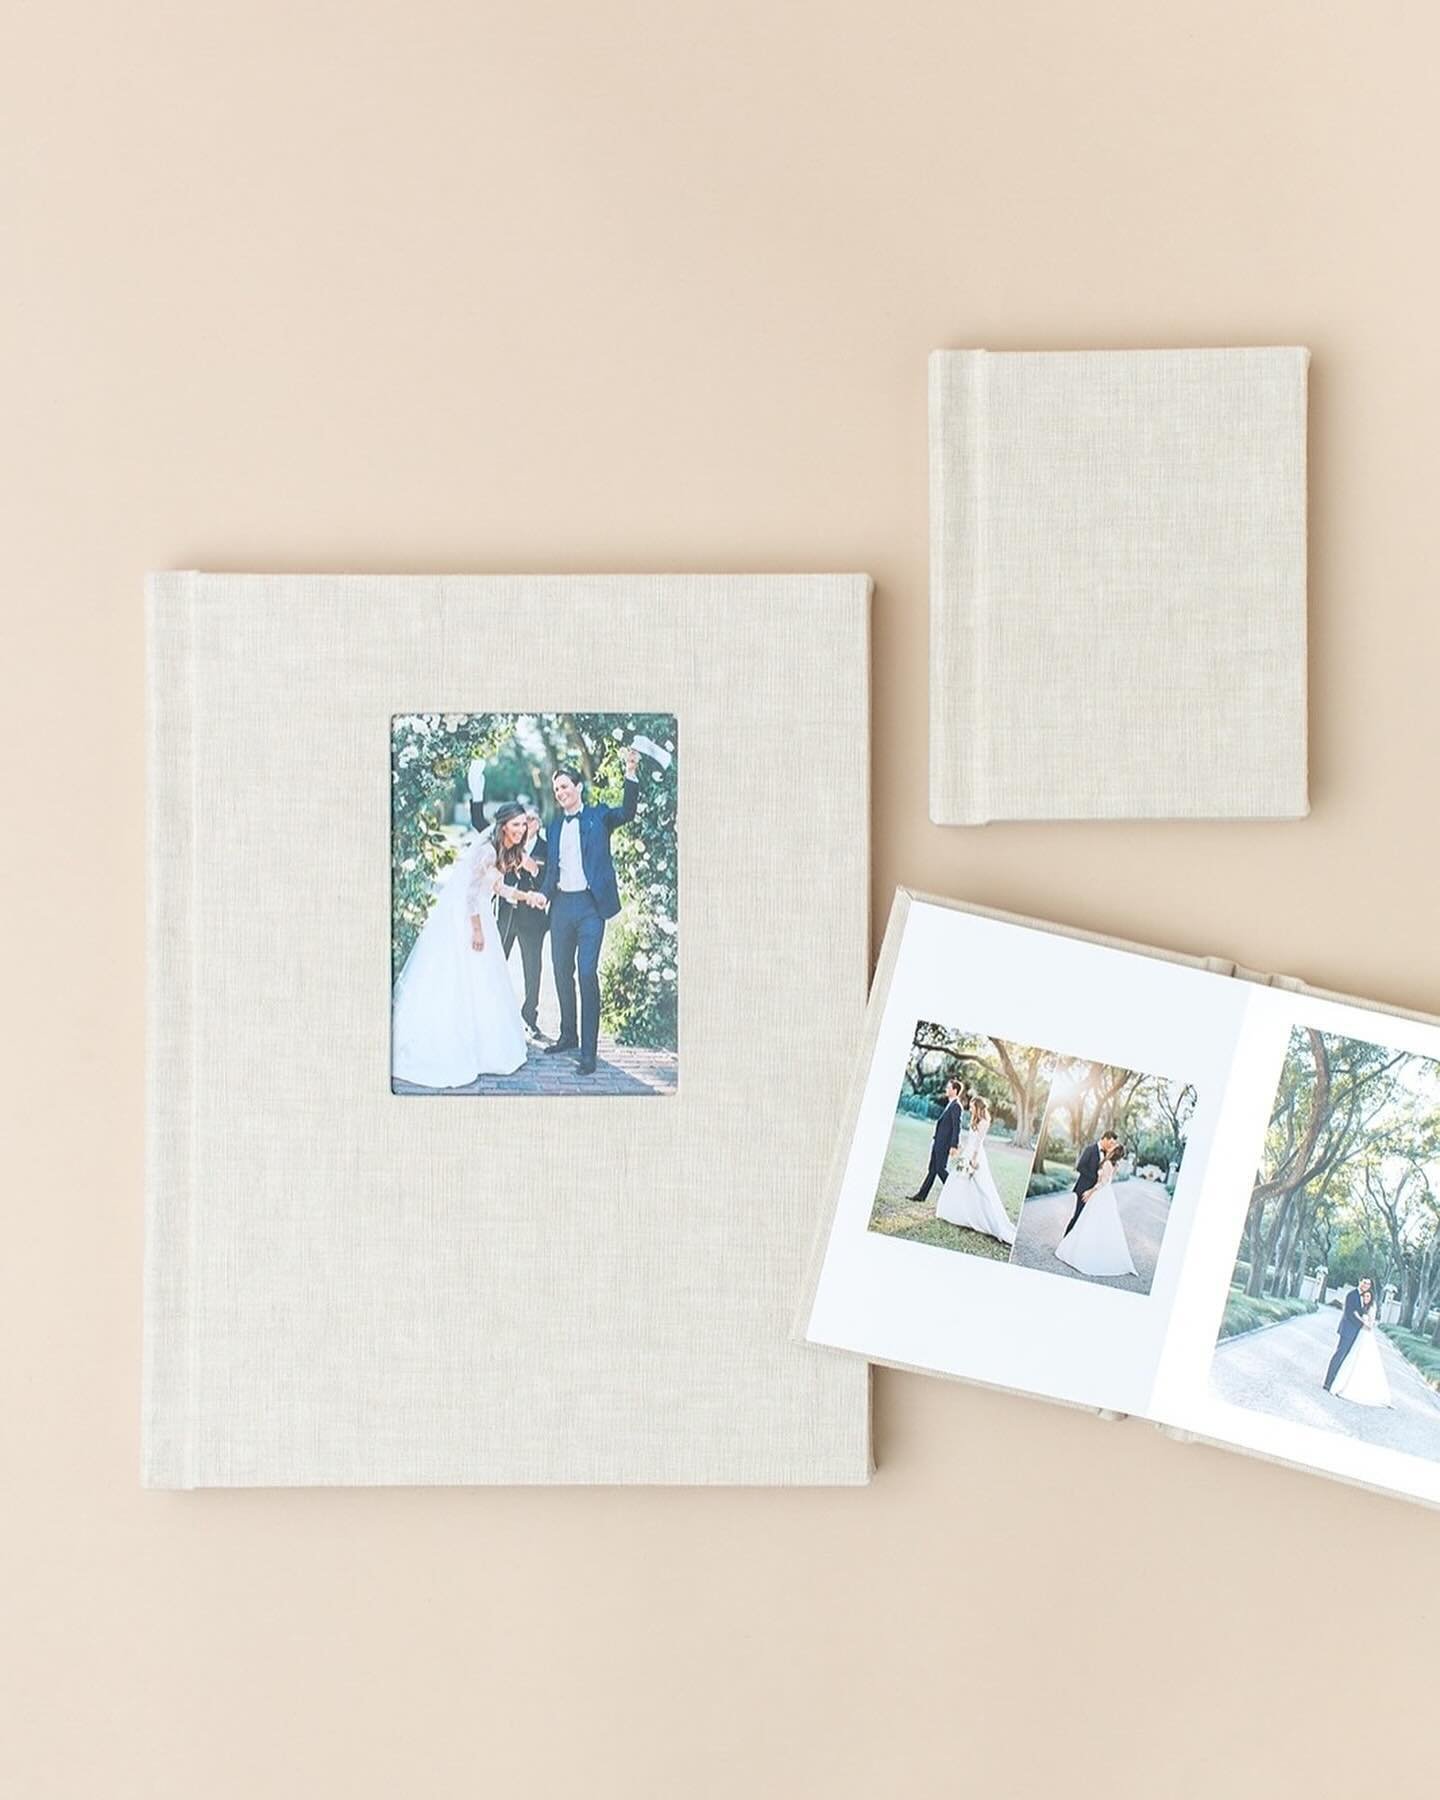 Have you considered investing in a wedding album after your wedding day? Chances are, your loved ones would cherish the opportunity to reminisce about your memories with you. 
⠀⠀⠀⠀⠀⠀⠀⠀⠀
Parent albums are miniature copies of your wedding album. Despit